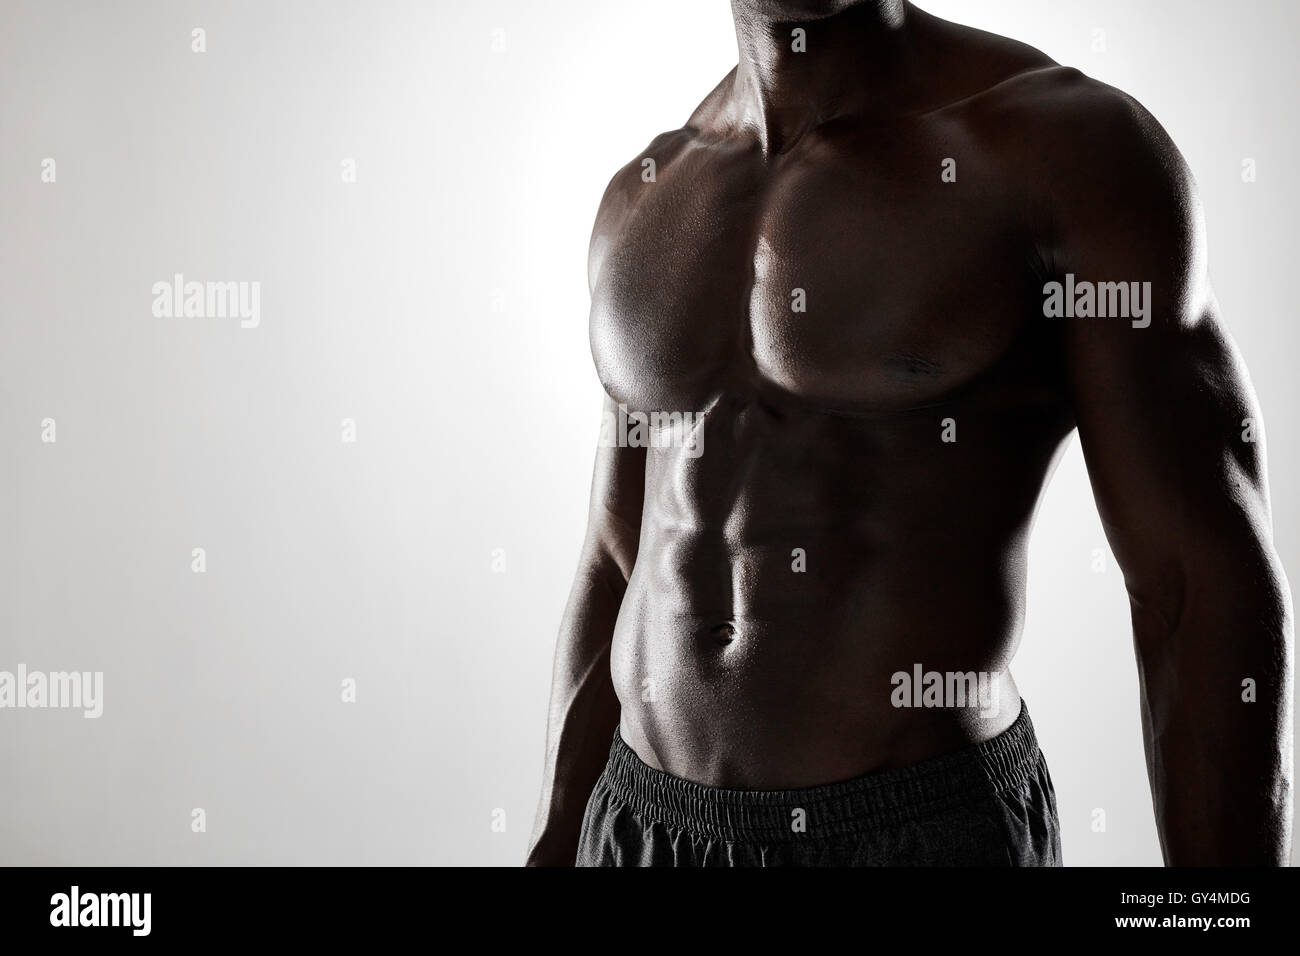 Close up shot of young african man with muscular body against grey background. Shirtless male model with muscular abs. Stock Photo